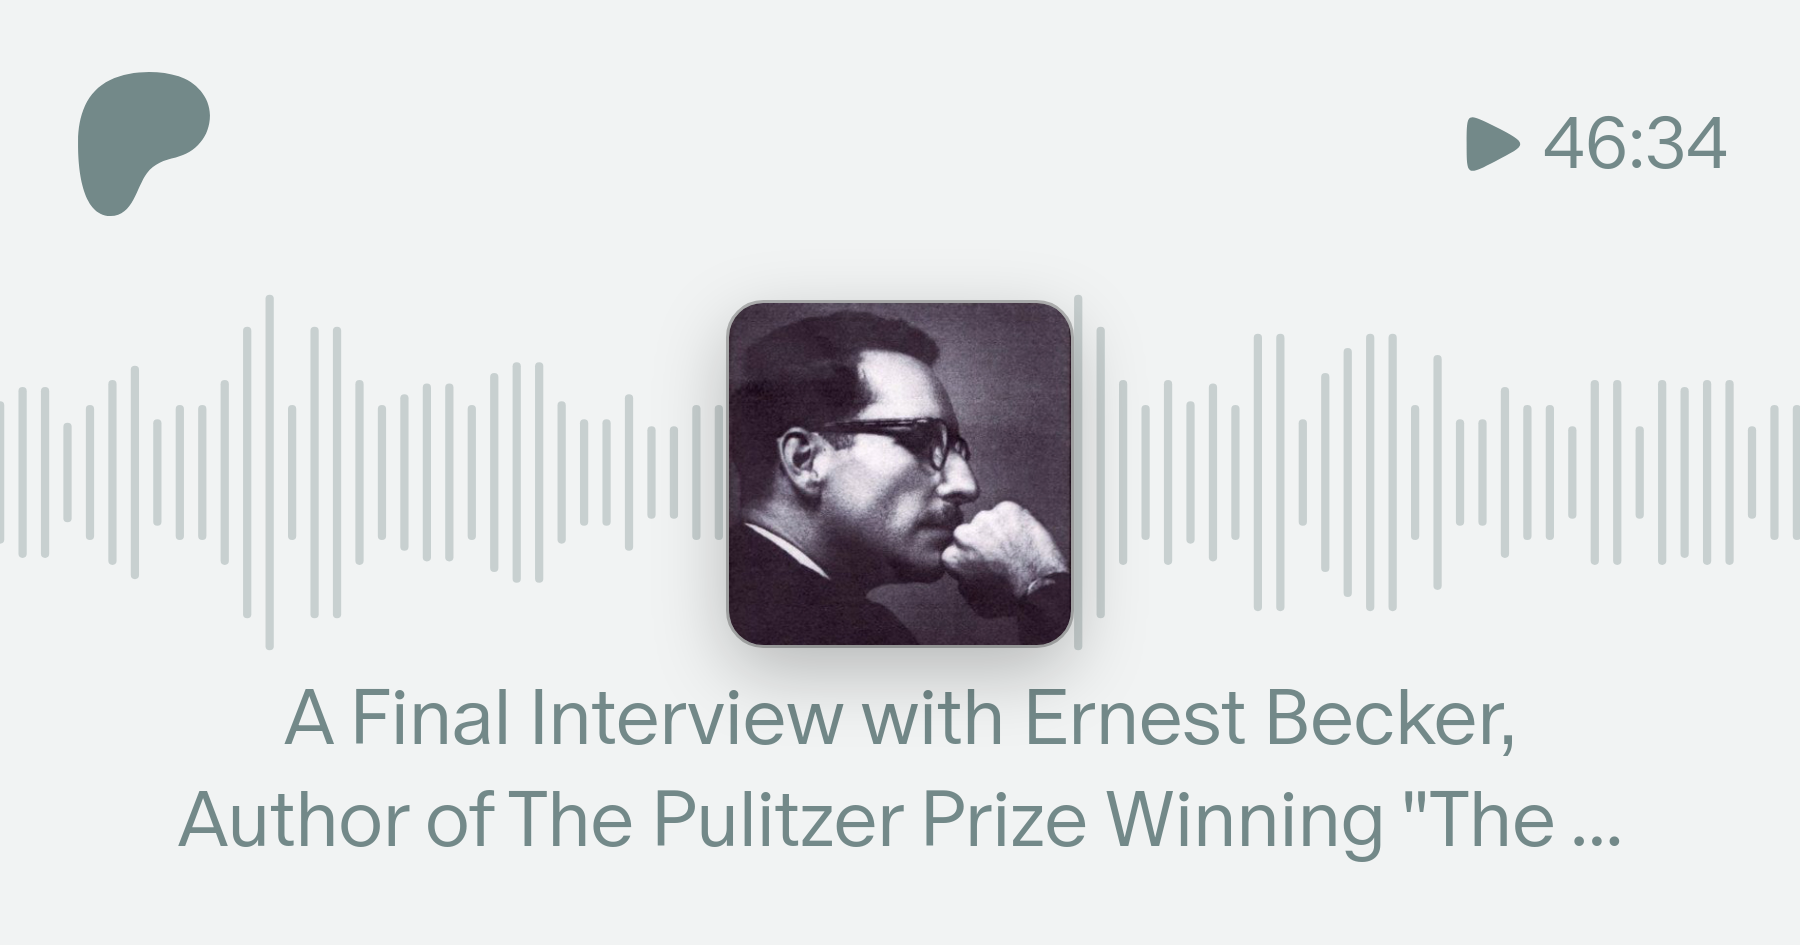 A Final Interview with Ernest Becker, Author of The Pulitzer Prize Winning  The Denial of Death, And A Fond Farewell to the Wonderful Ernest Becker  Foundation